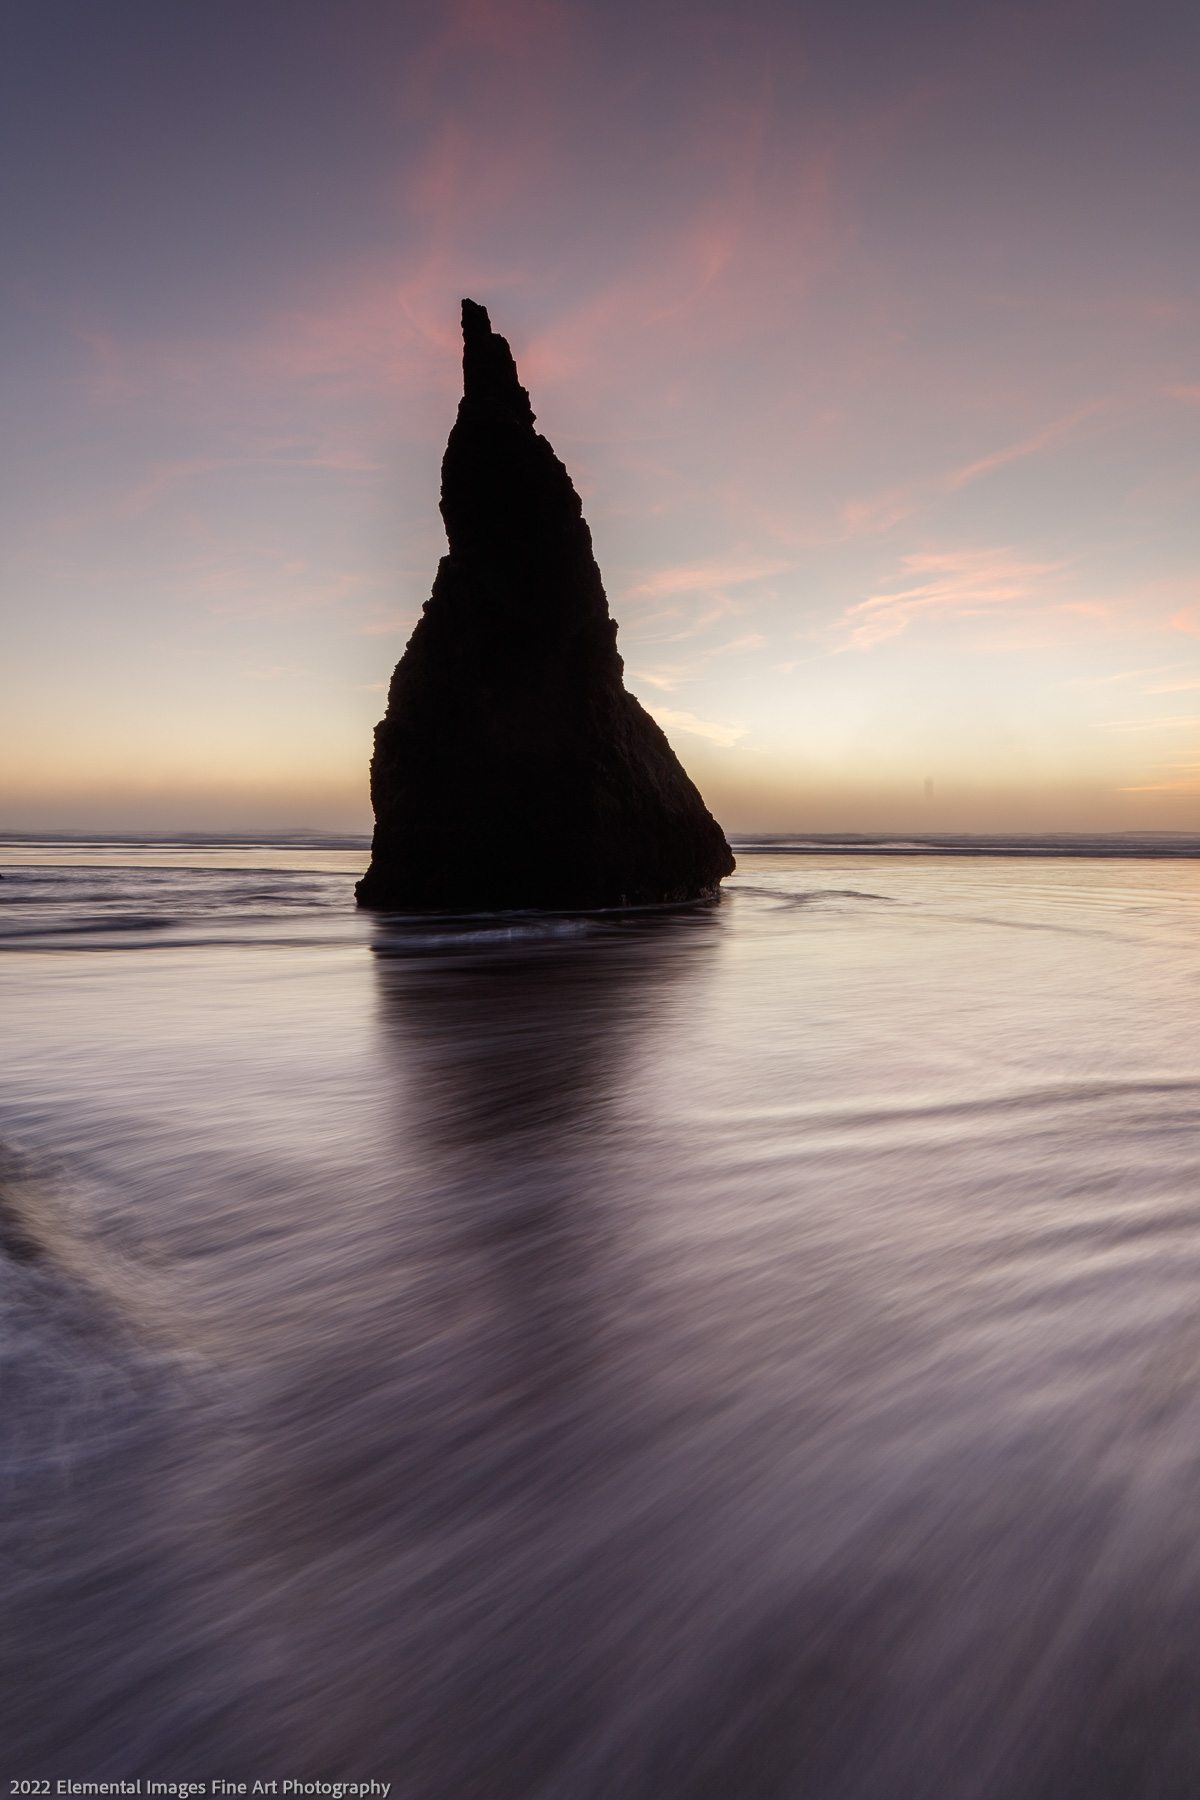 Wizard's Hat | Bandon | OR | USA - © 2022 Elemental Images Fine Art Photography - All Rights Reserved Worldwide